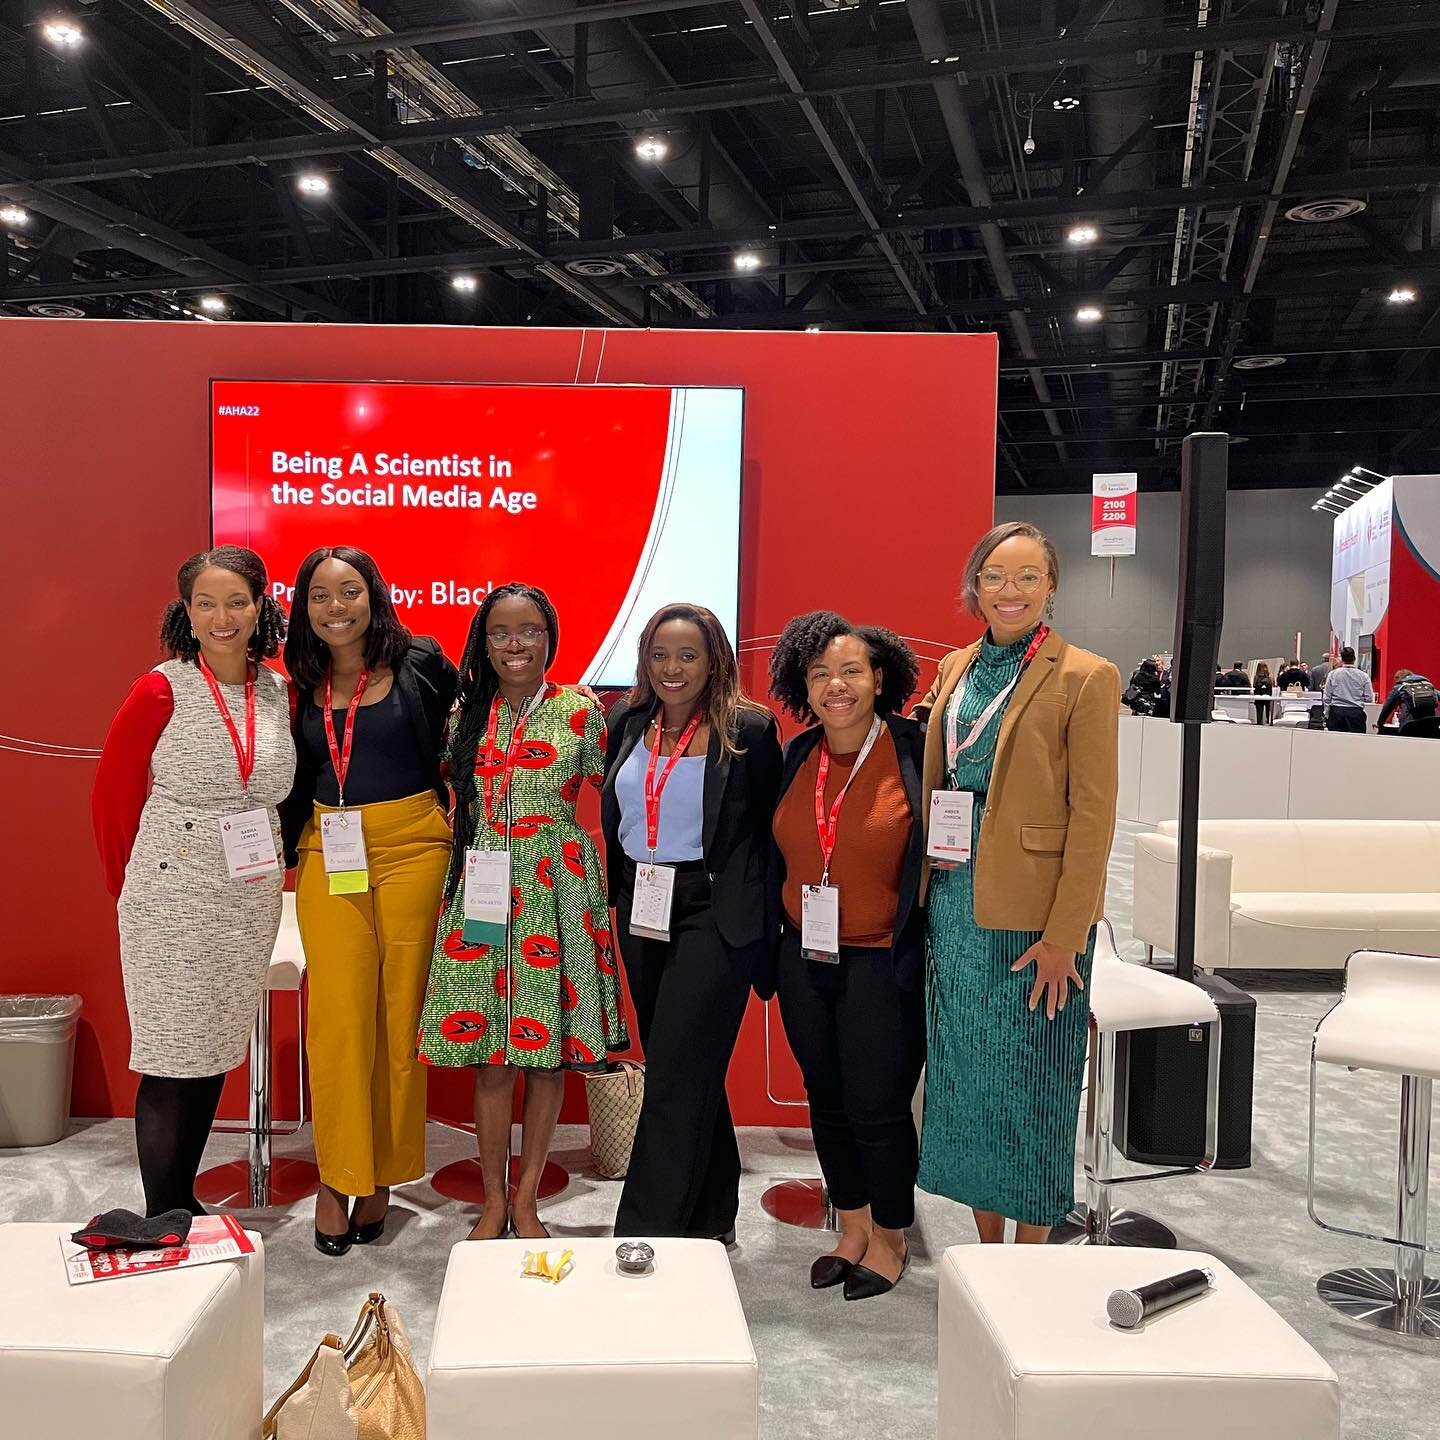 I co-moderated a panel on science and social media at the @american_heart Scientific Sessions. It was an honor to hear amazing Black investigators and medical doctors share their experiences. 
The panel was organized by @blackincardio, a non-profit o